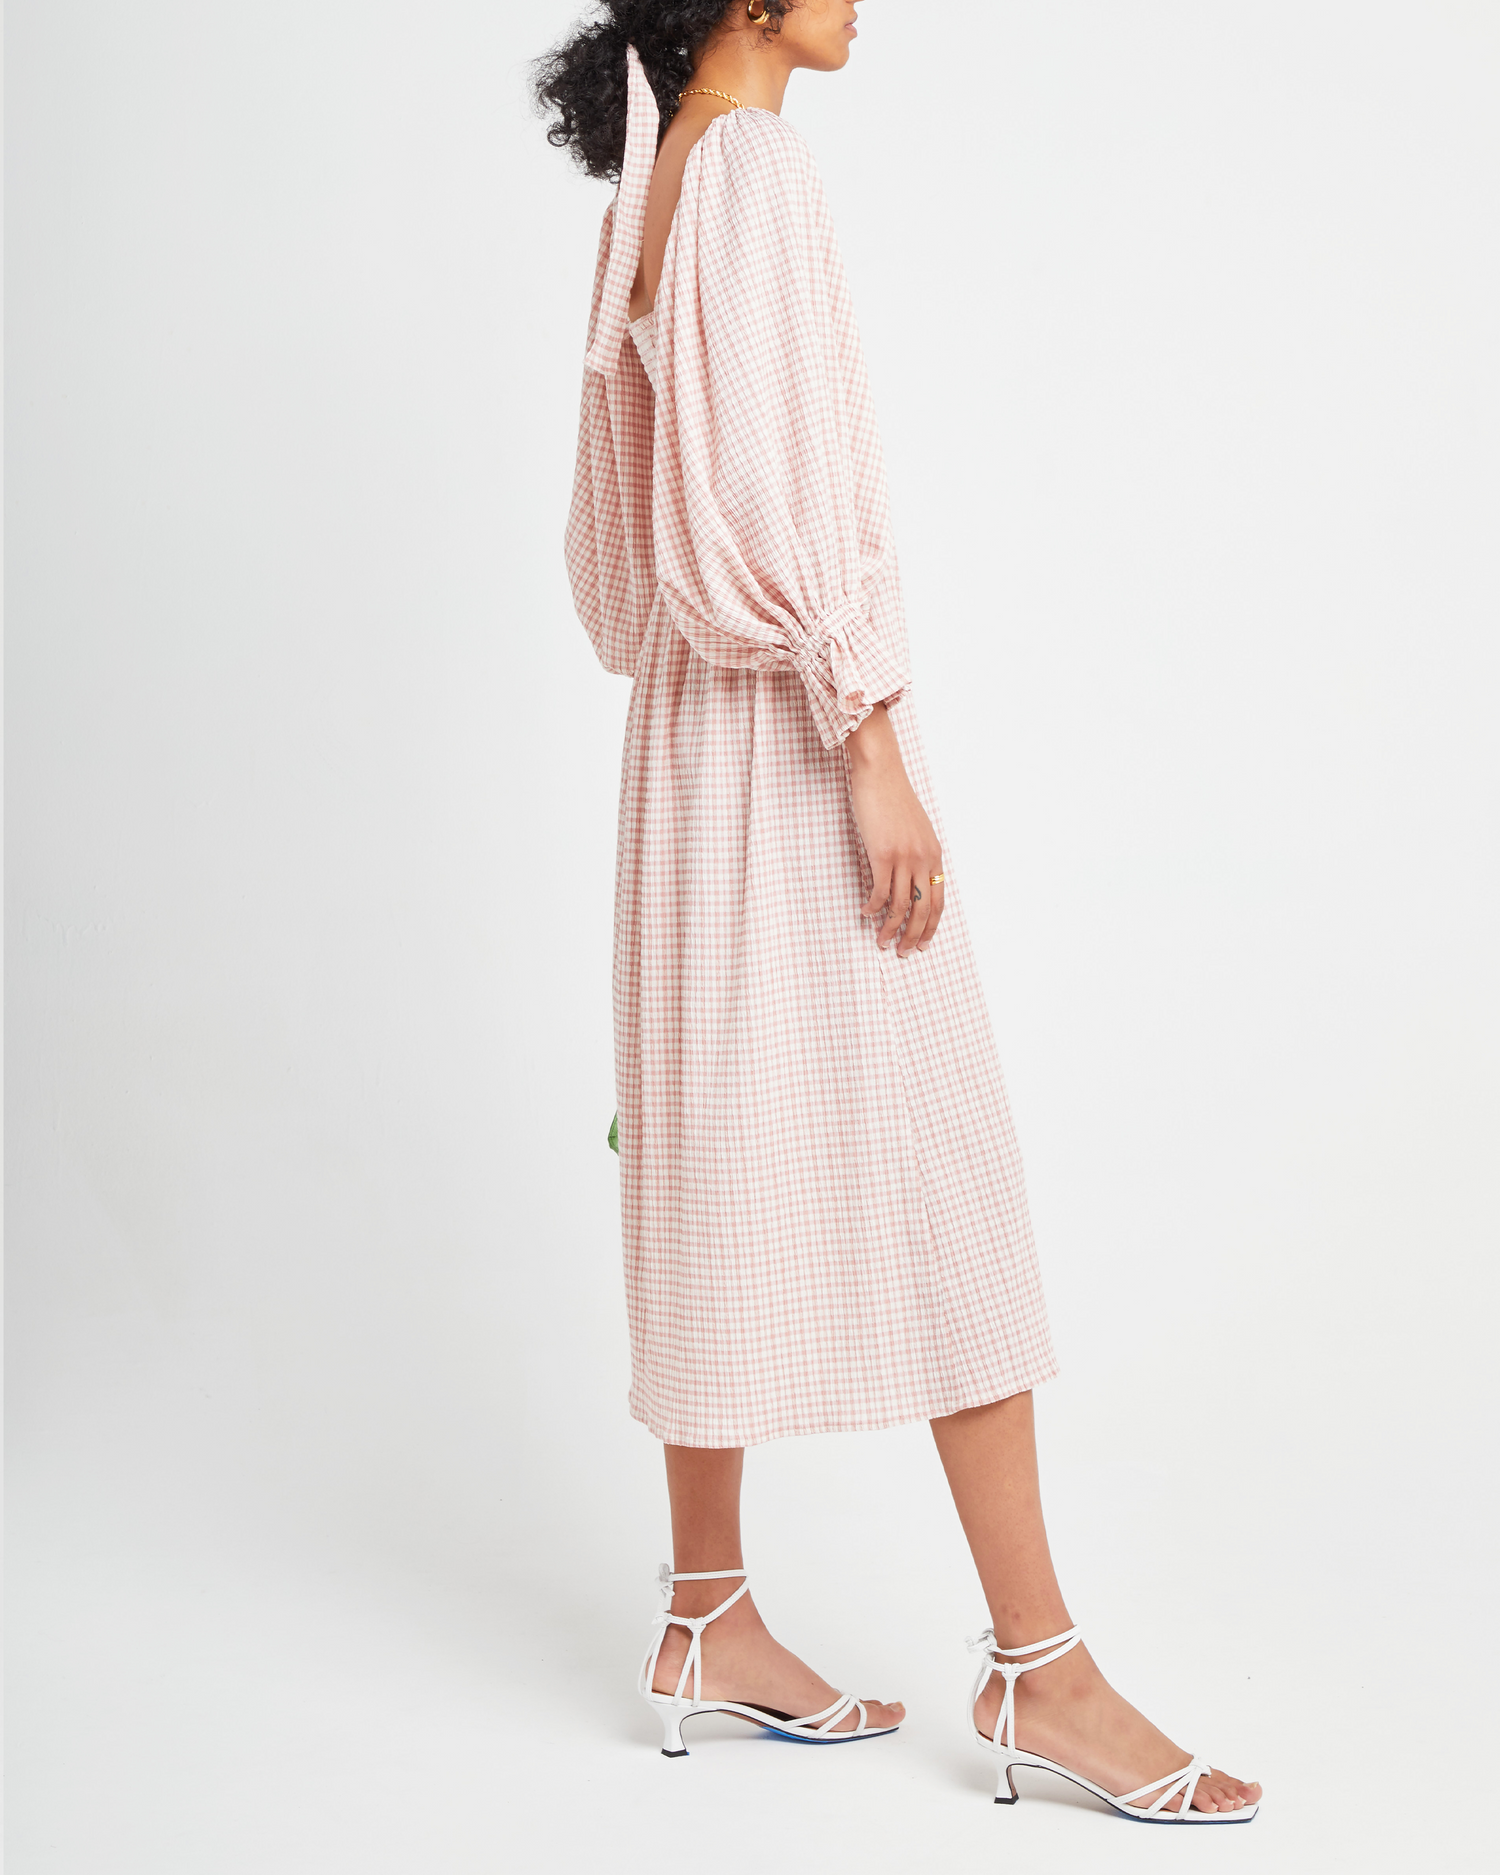 Third image of Athena Dress, a pink midi dress, off shoulder, long sleeve, puff sleeves, smocked